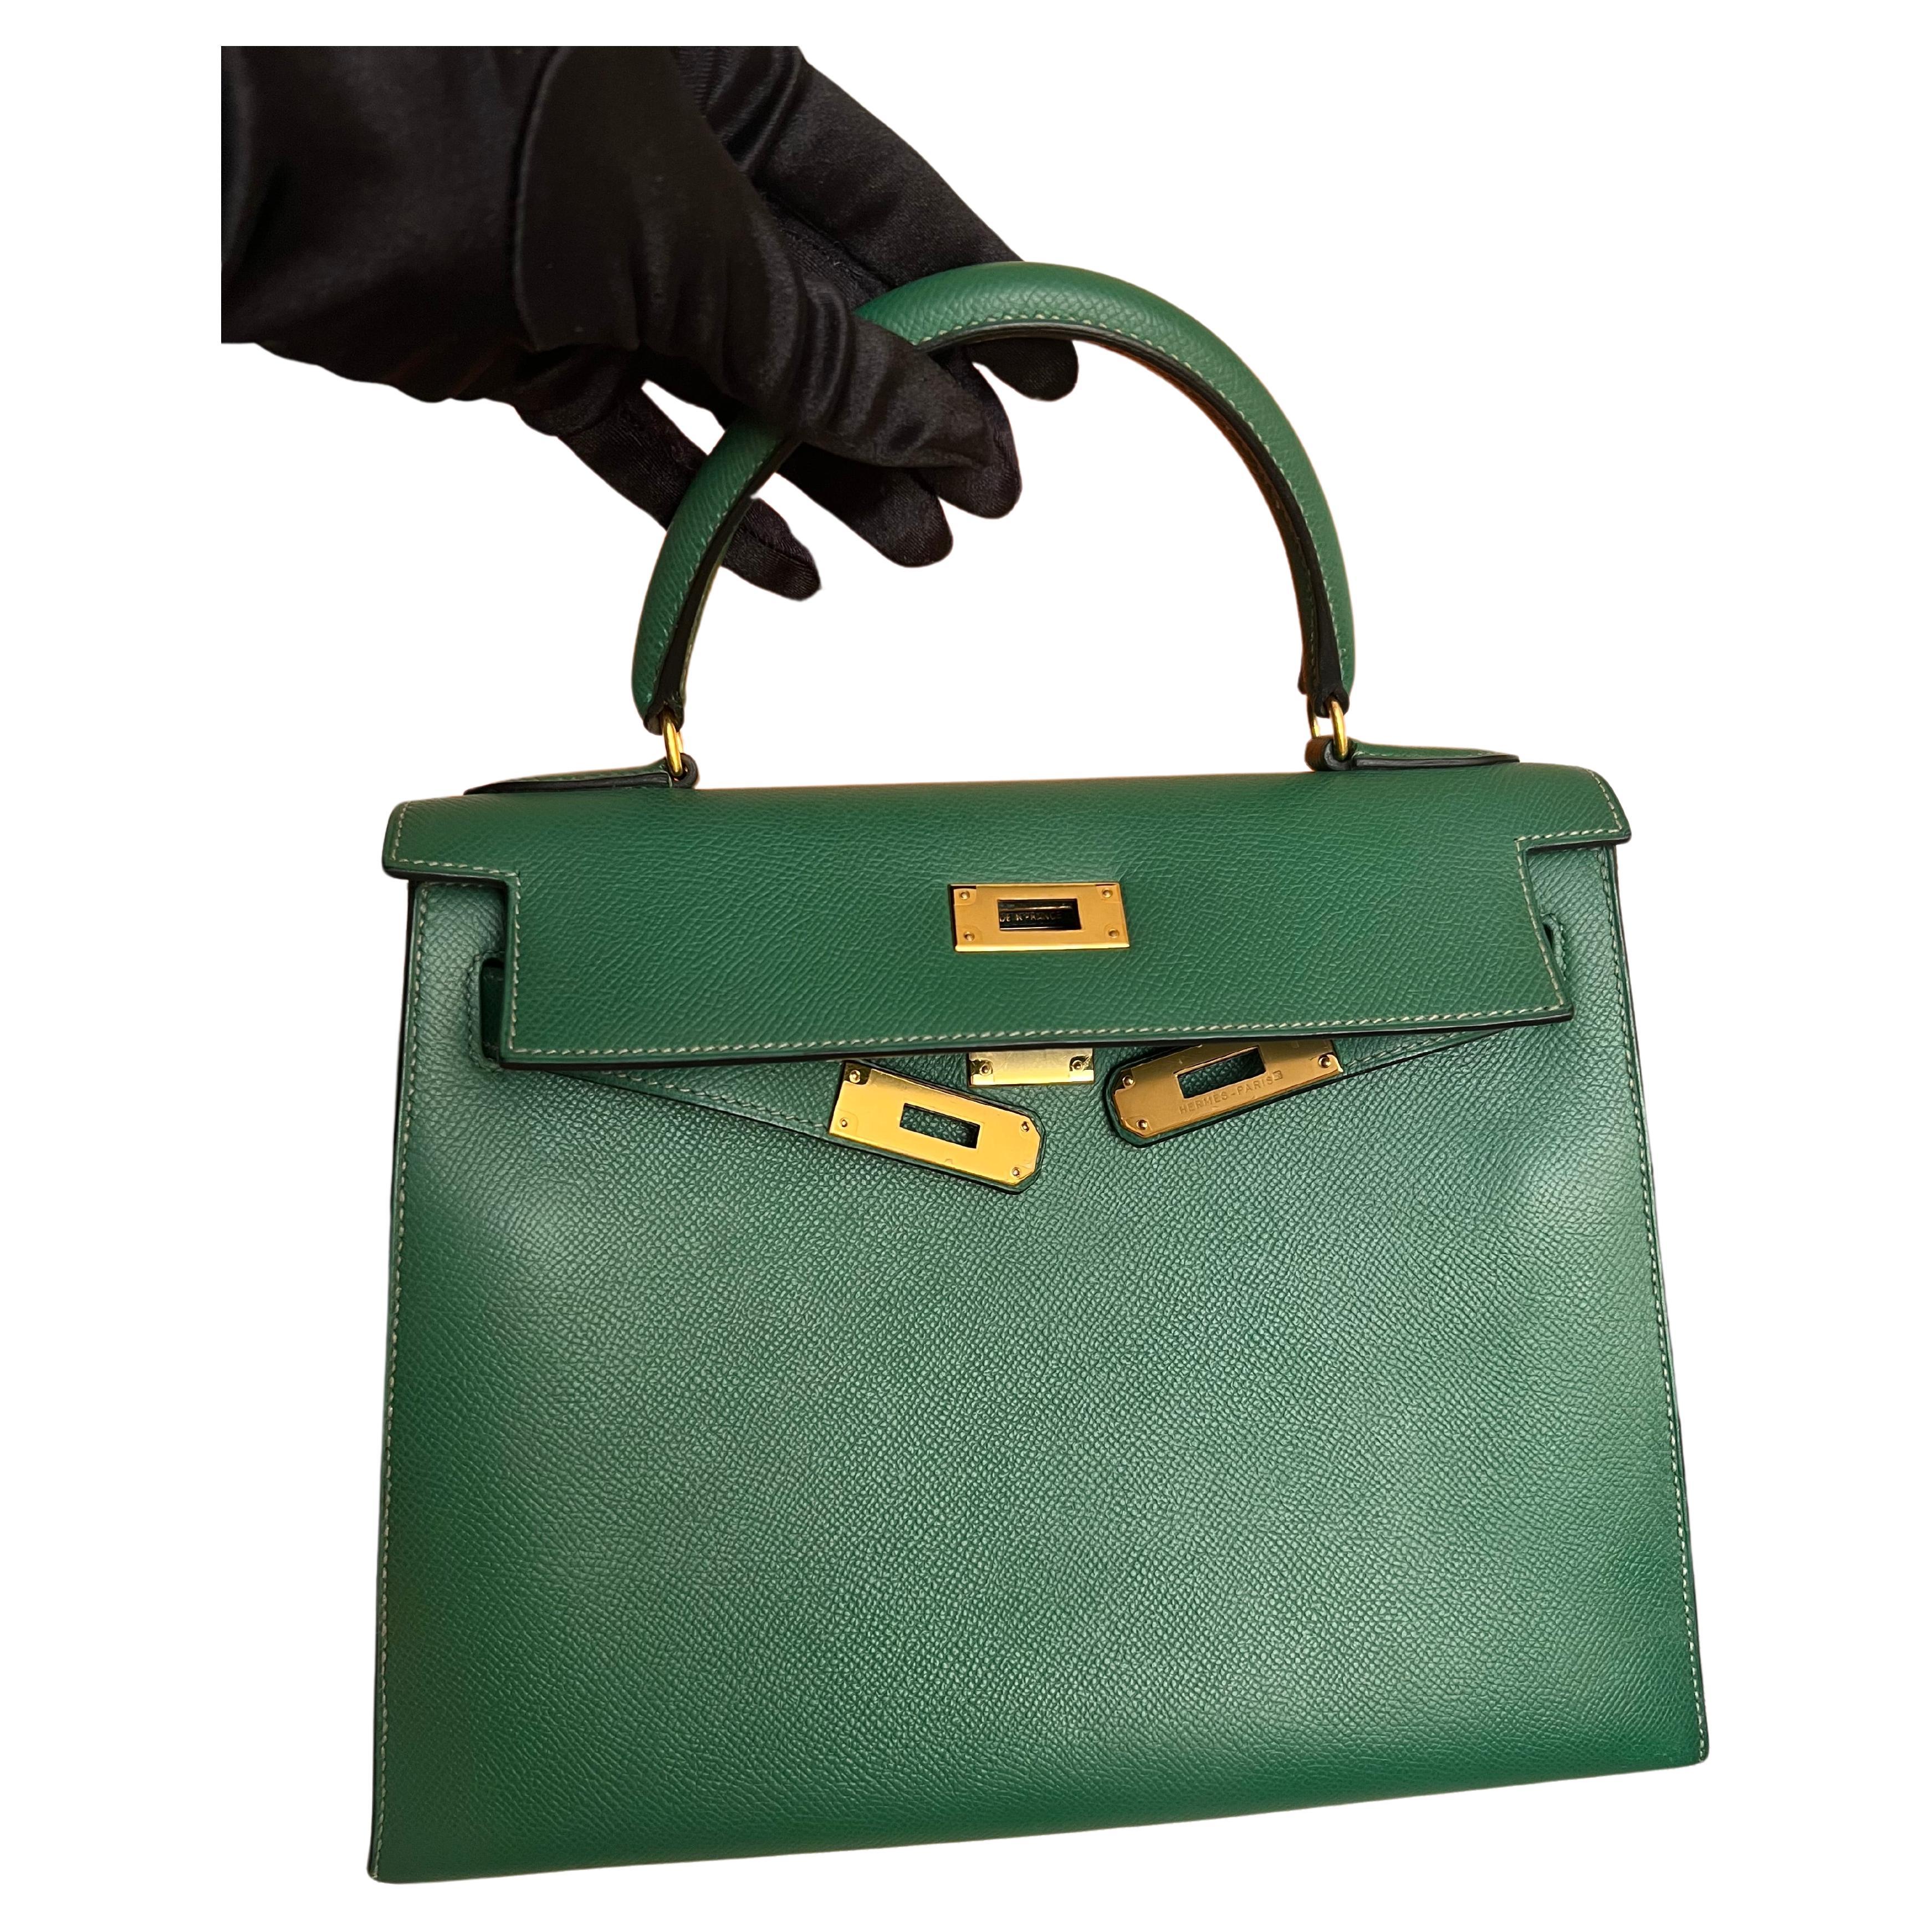 Hermes Kelly 28 Cactus Sellier Bag with GHW in Epsom leather 